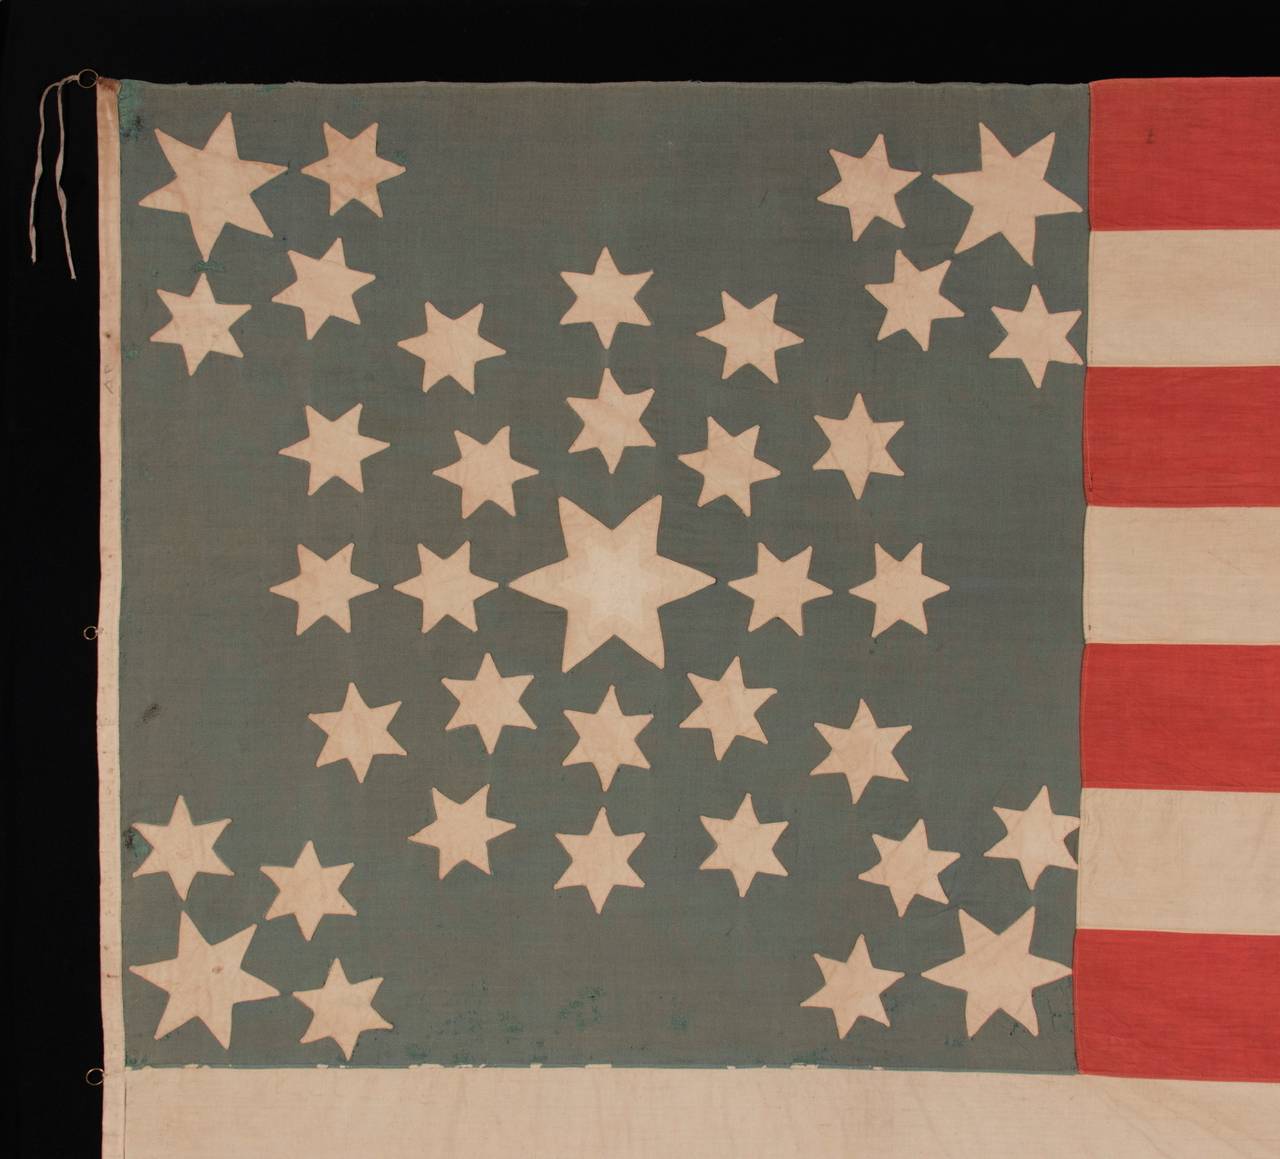 A MASTERPIECE AMONG KNOWN EXAMPLES:
AMAZINGLY GRAPHIC FLAG WITH 37 SIX-POINTED STARS IN A SPECTACULAR DOUBLE-WREATH STYLE MEDALLION, POSSIBLY WITH A PRO-UNION MESSAGE, INSCRIBED WITH THE INITIALS 